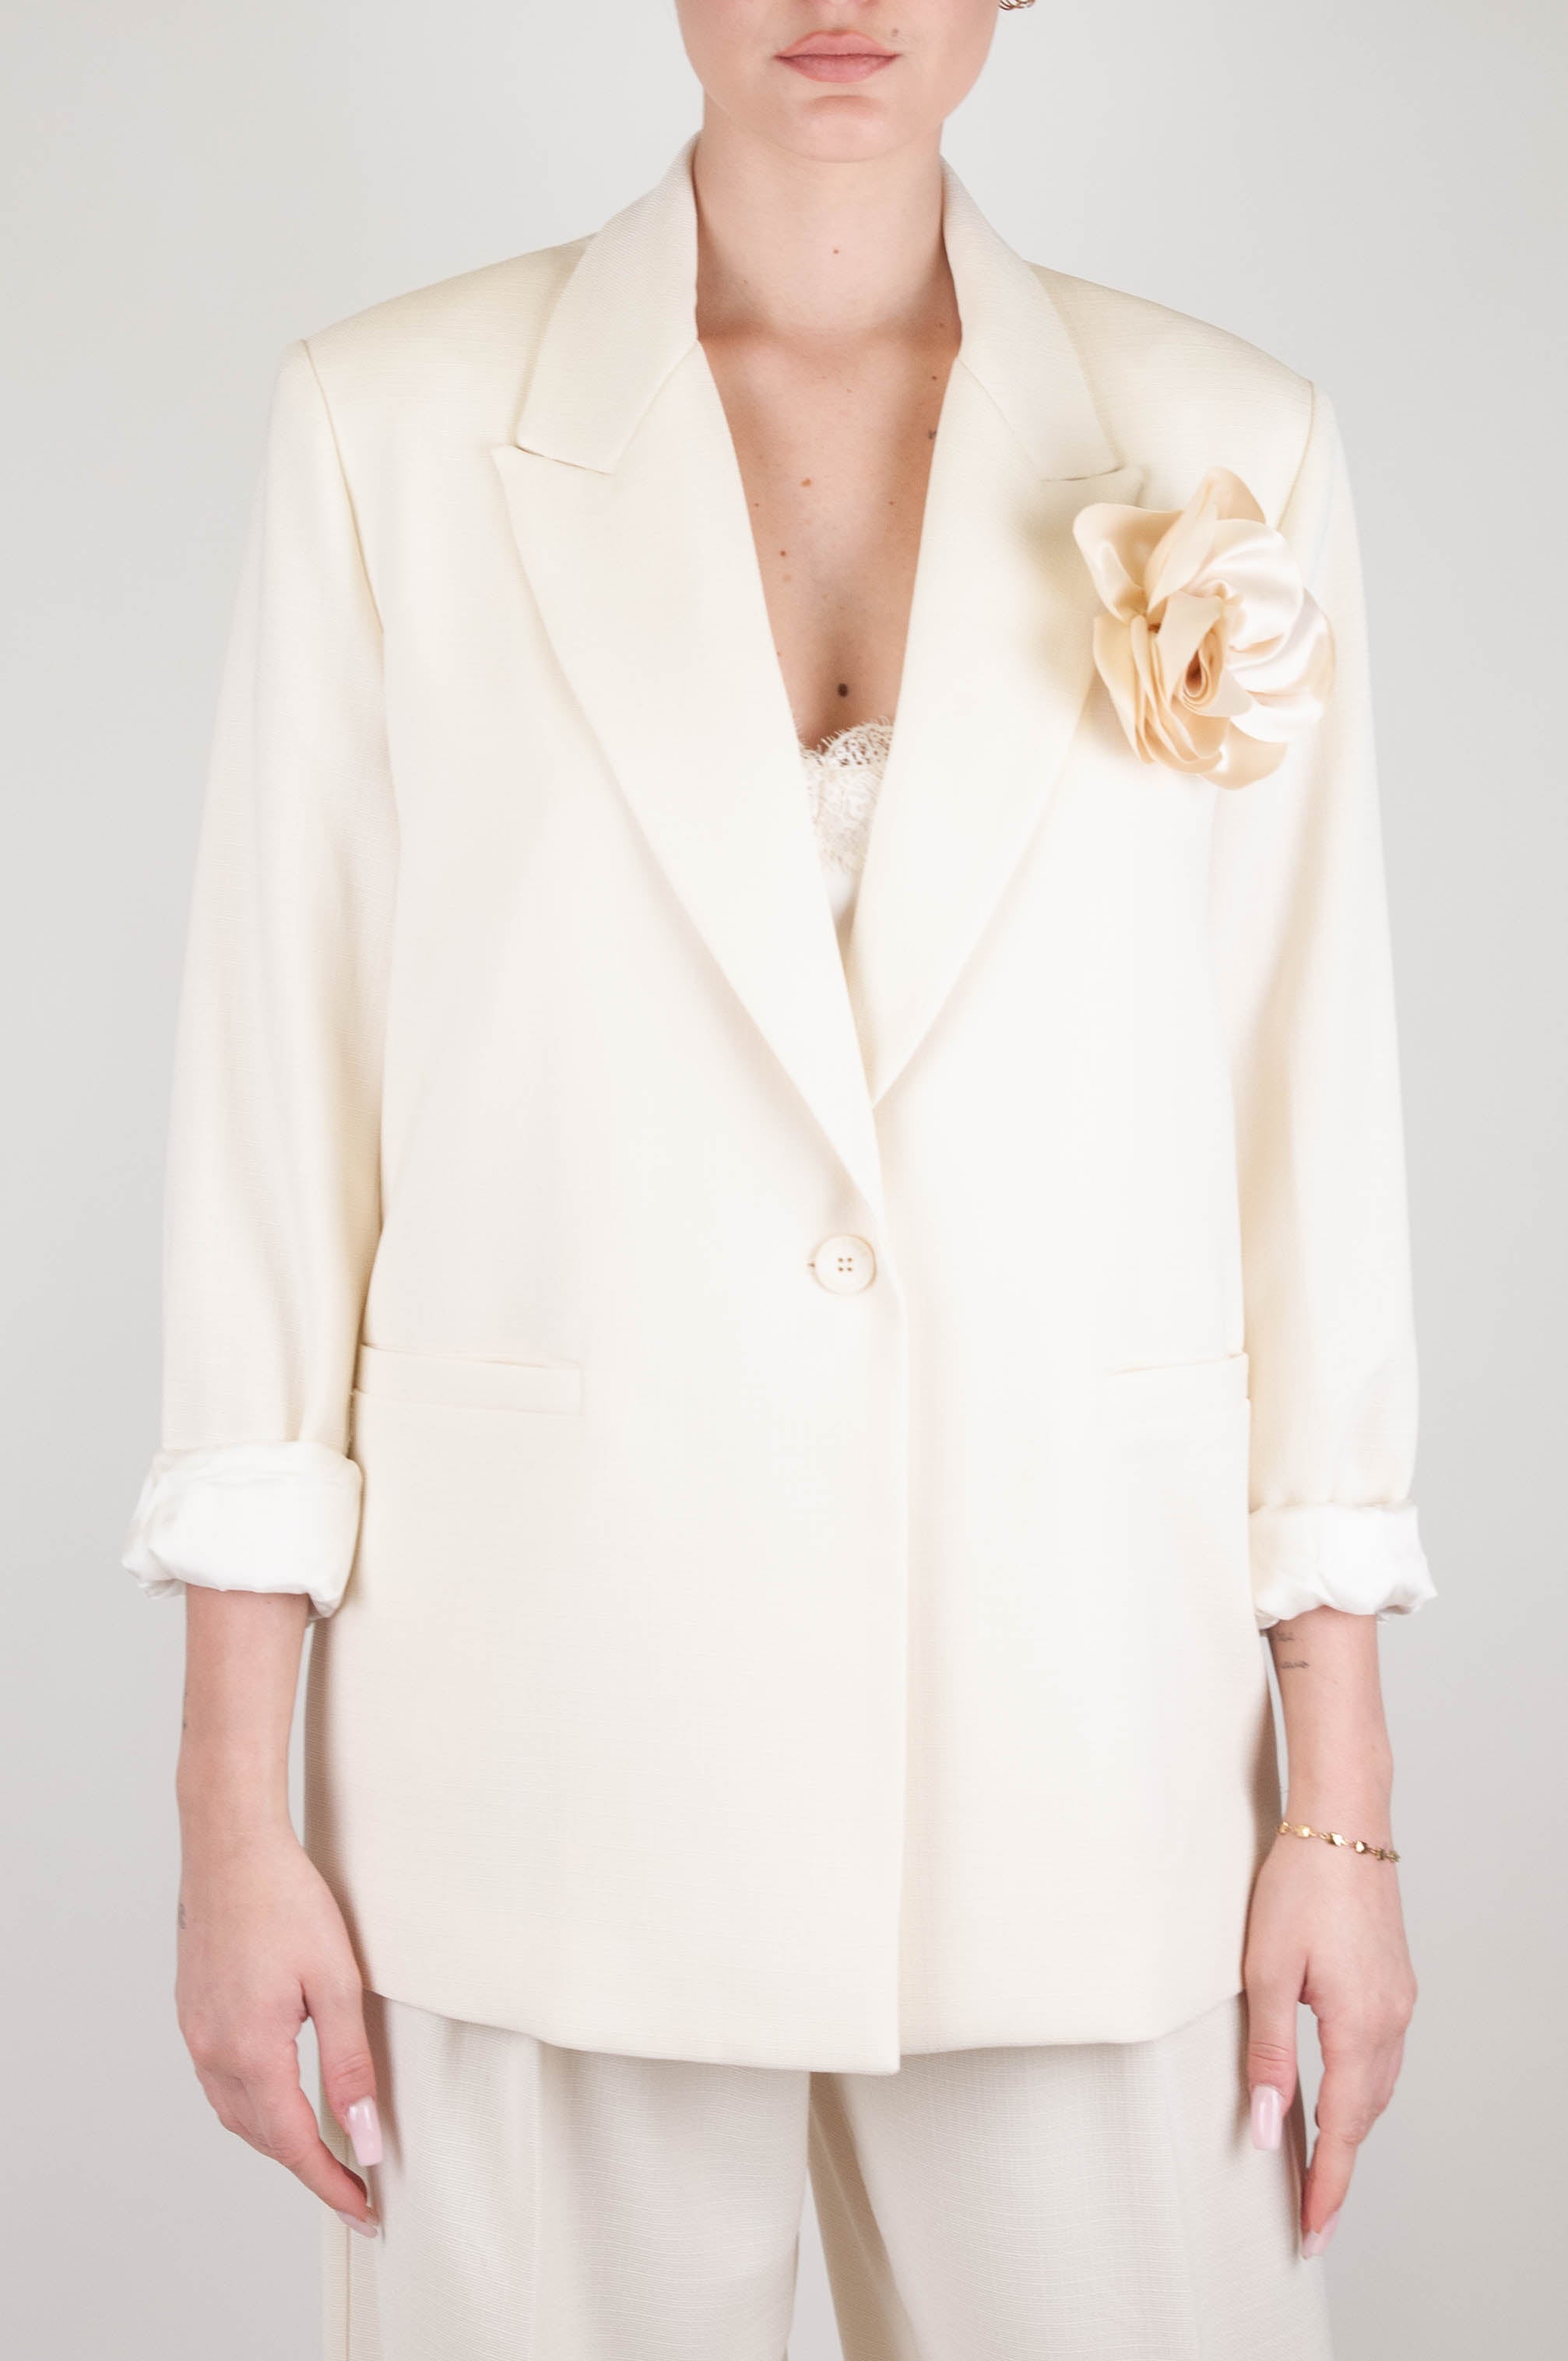 Haveone - Single-breasted jacket with flower brooch